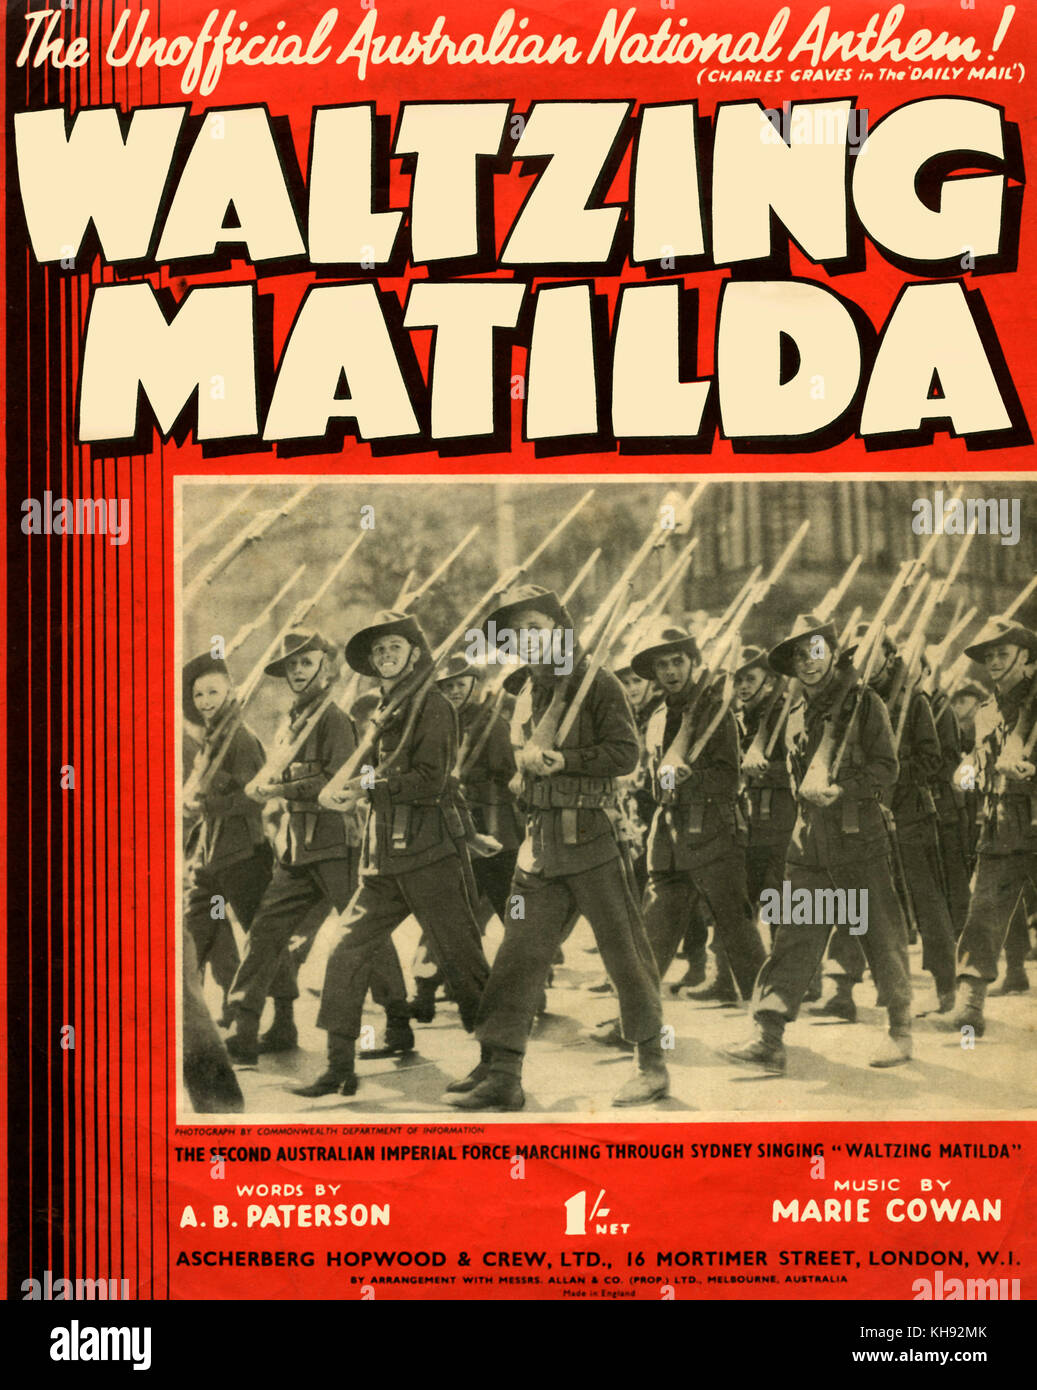 Waltzing Matilda - score cover, 1940.  Song with music by Marie Cowan and A.B.Paterson.  Australian folk song known as the 'unofficial Australian national anthem'.  Shown on cover: Second Australian Imperial Force marching through Sydney. During World War 2. Stock Photo